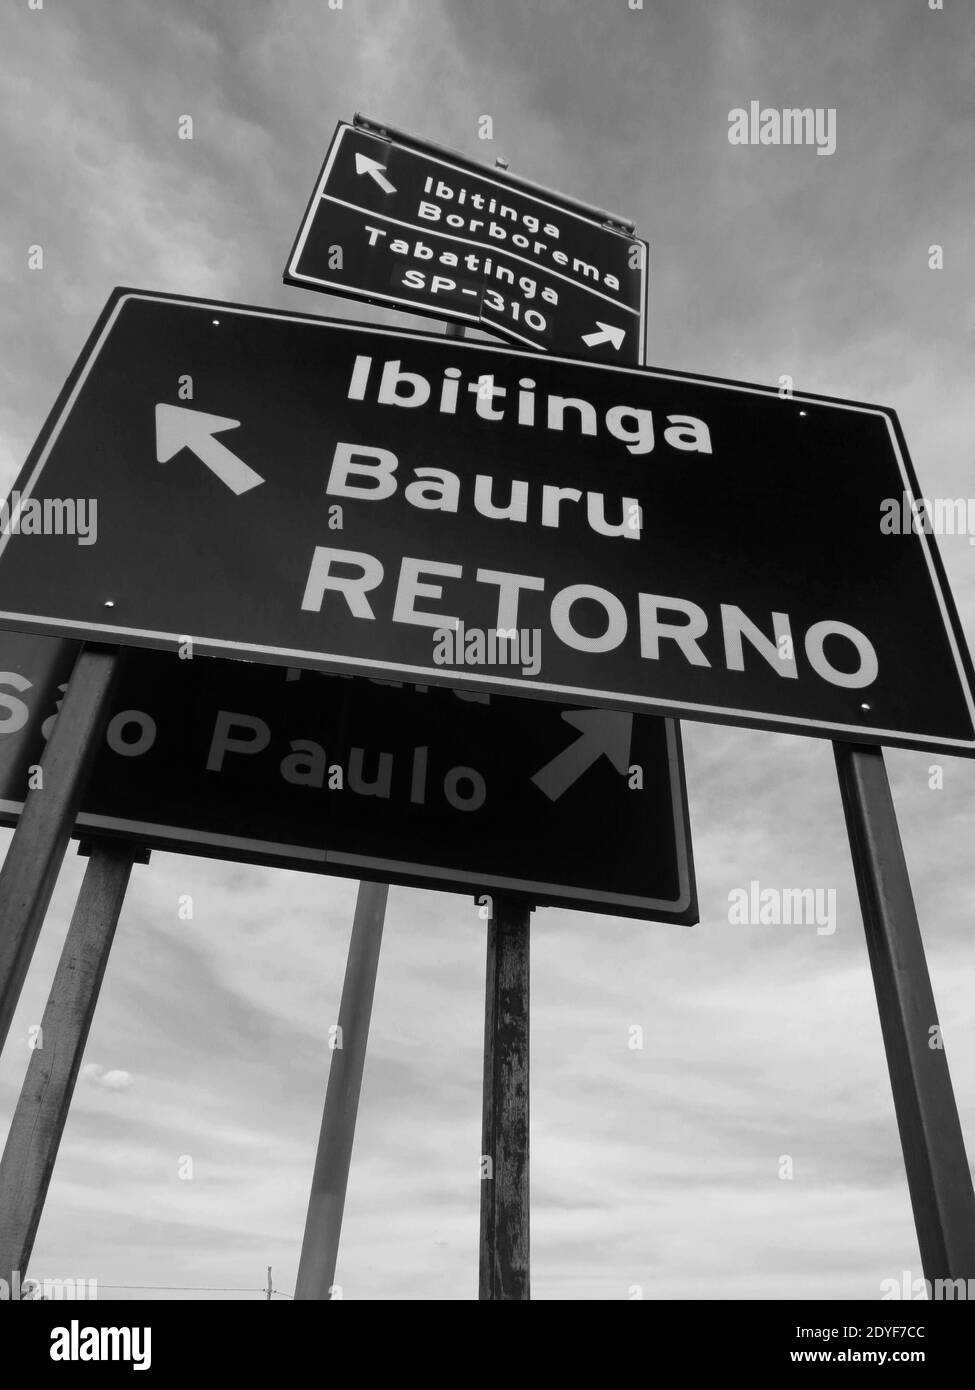 Group of metal signs indicating multiple locations in a confuse way at brazilian countryside [Black and White colors] Stock Photo